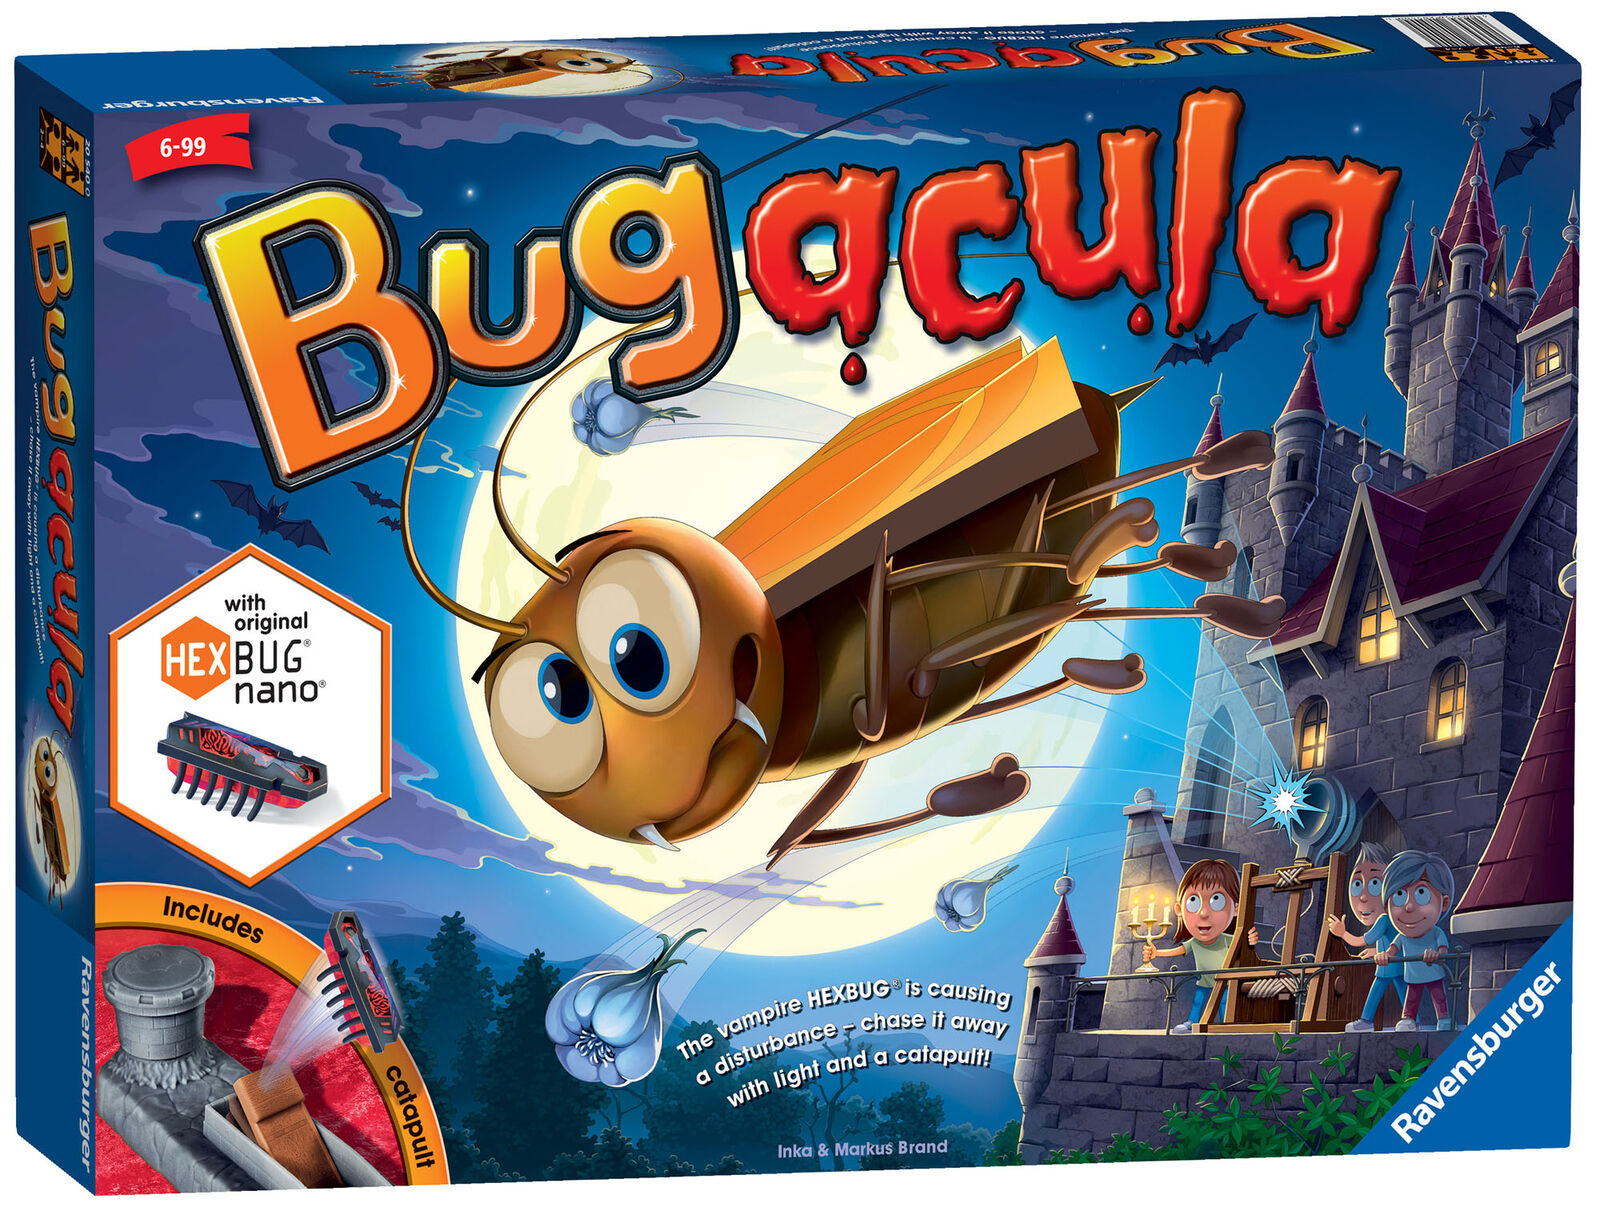 20540 Ravensburger Bugacula Board Game Suitable for ages 6 years and up.